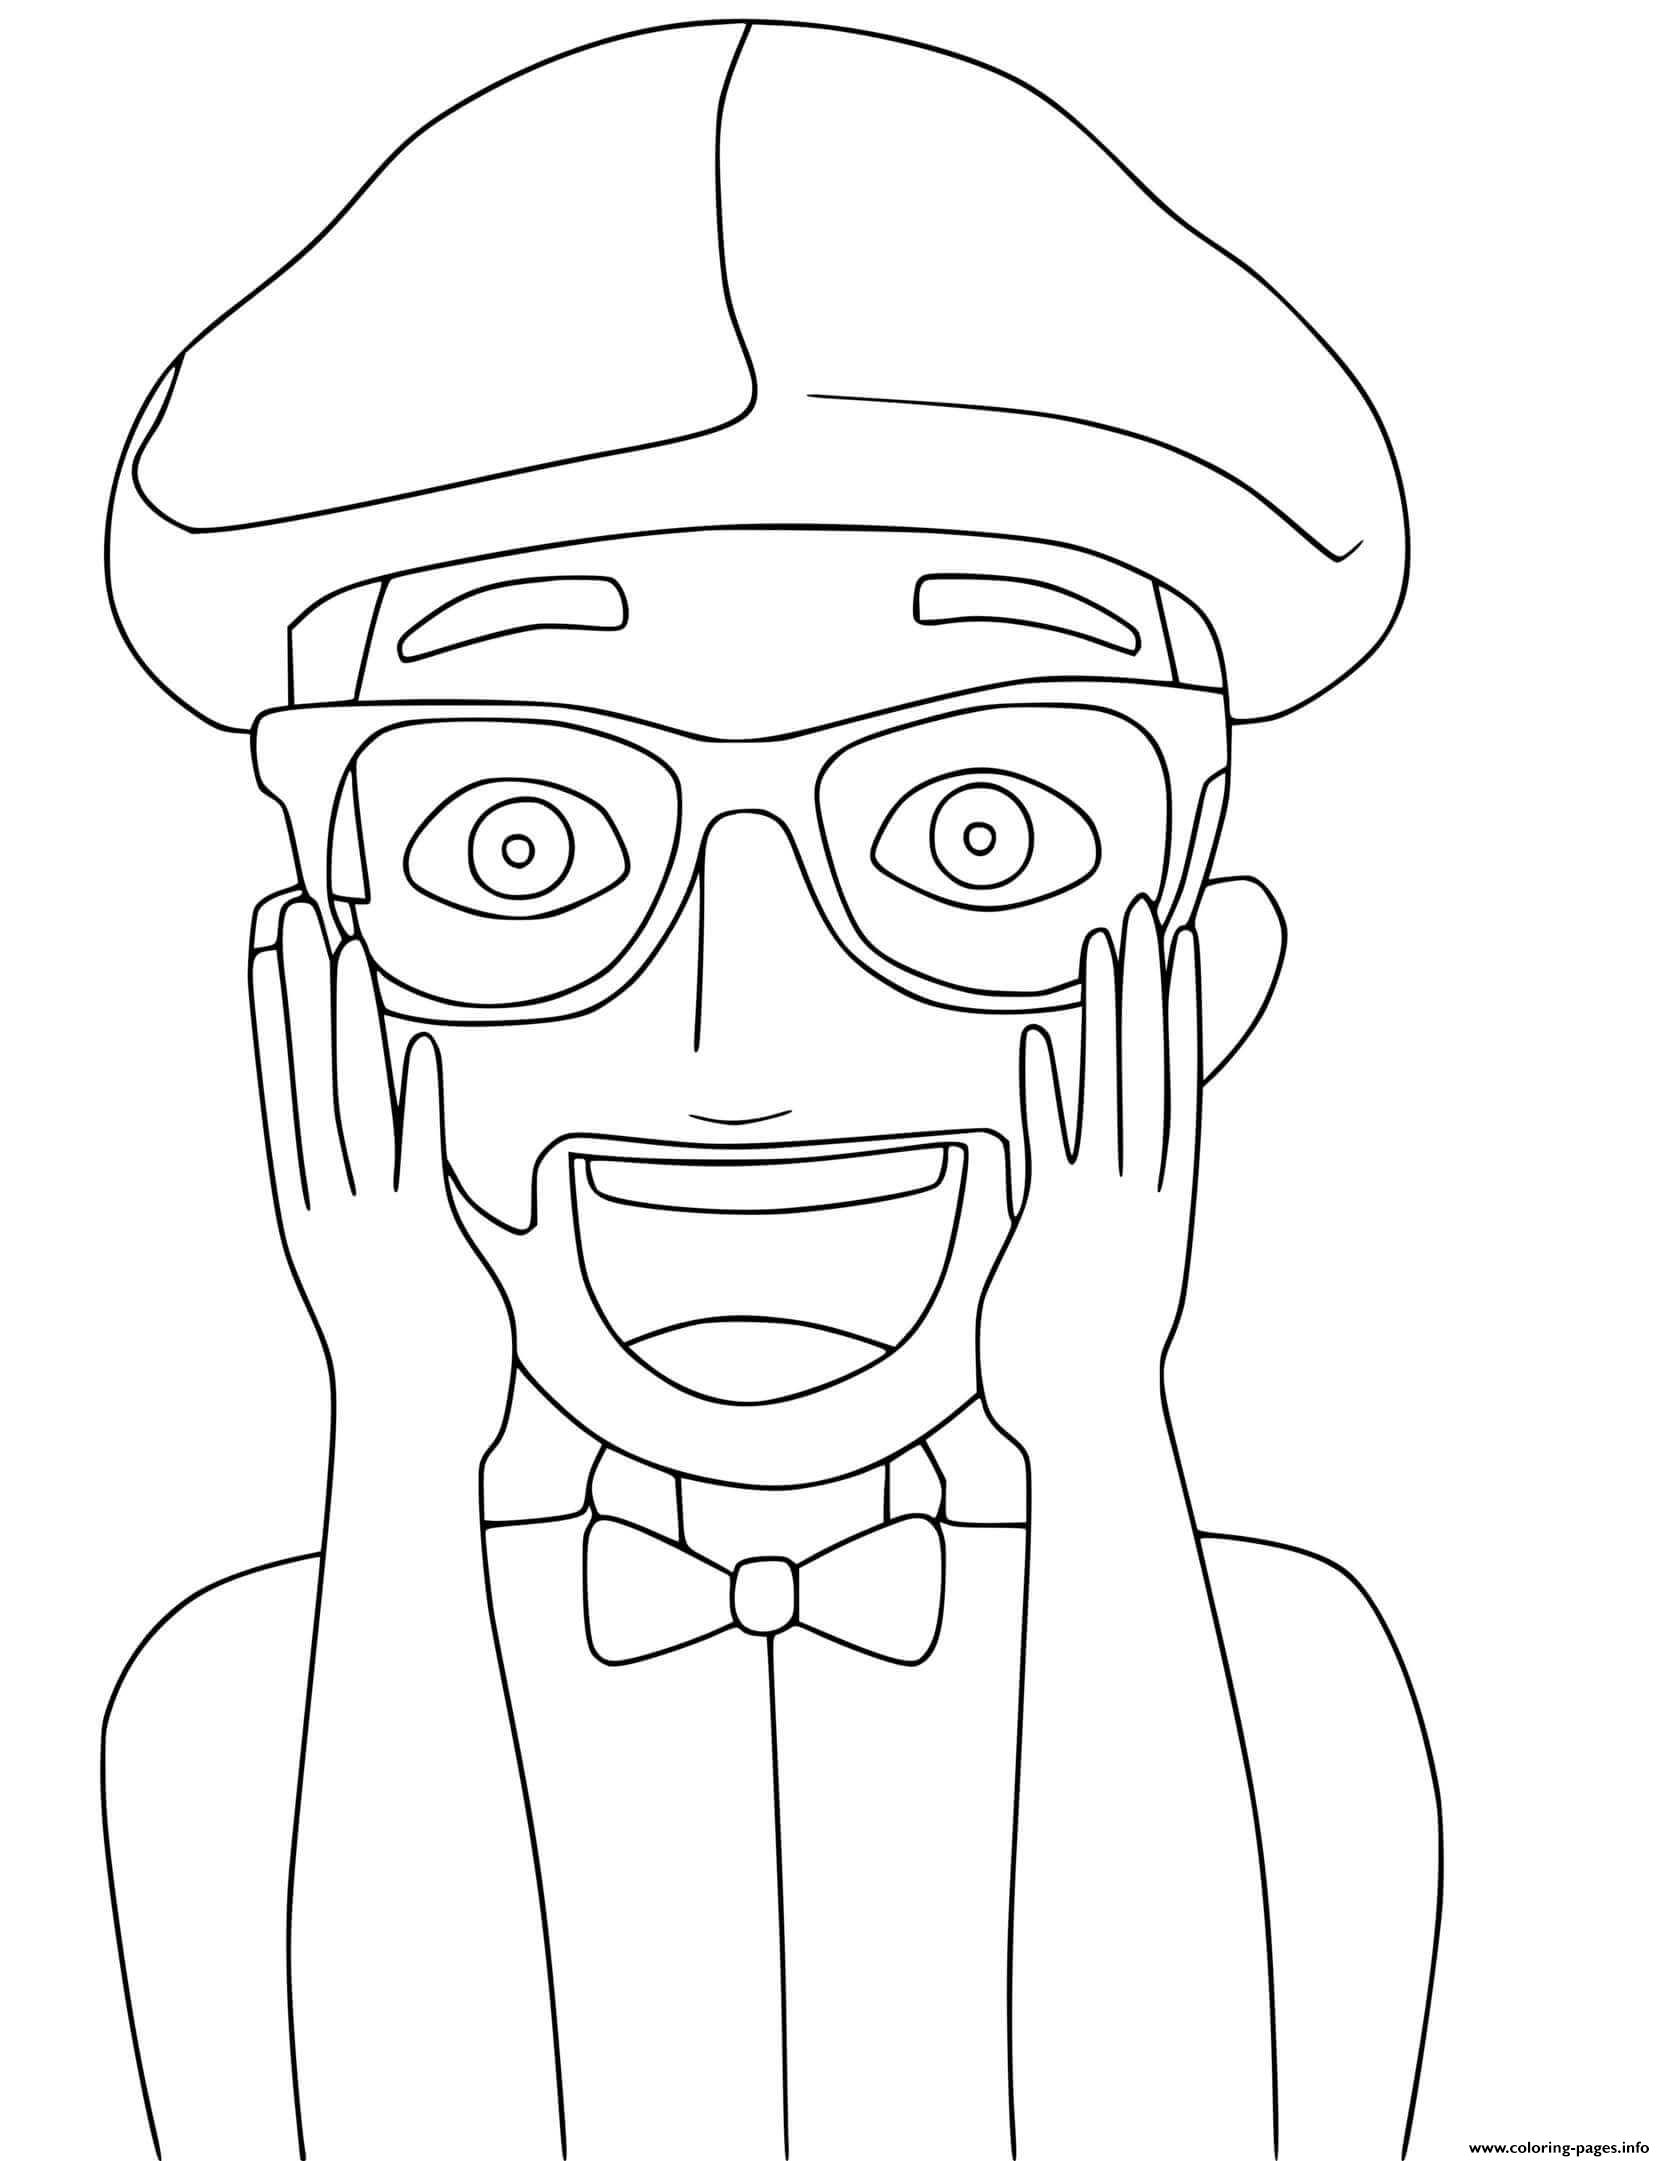 Printable Blippi Coloring Pages - Printable Templates